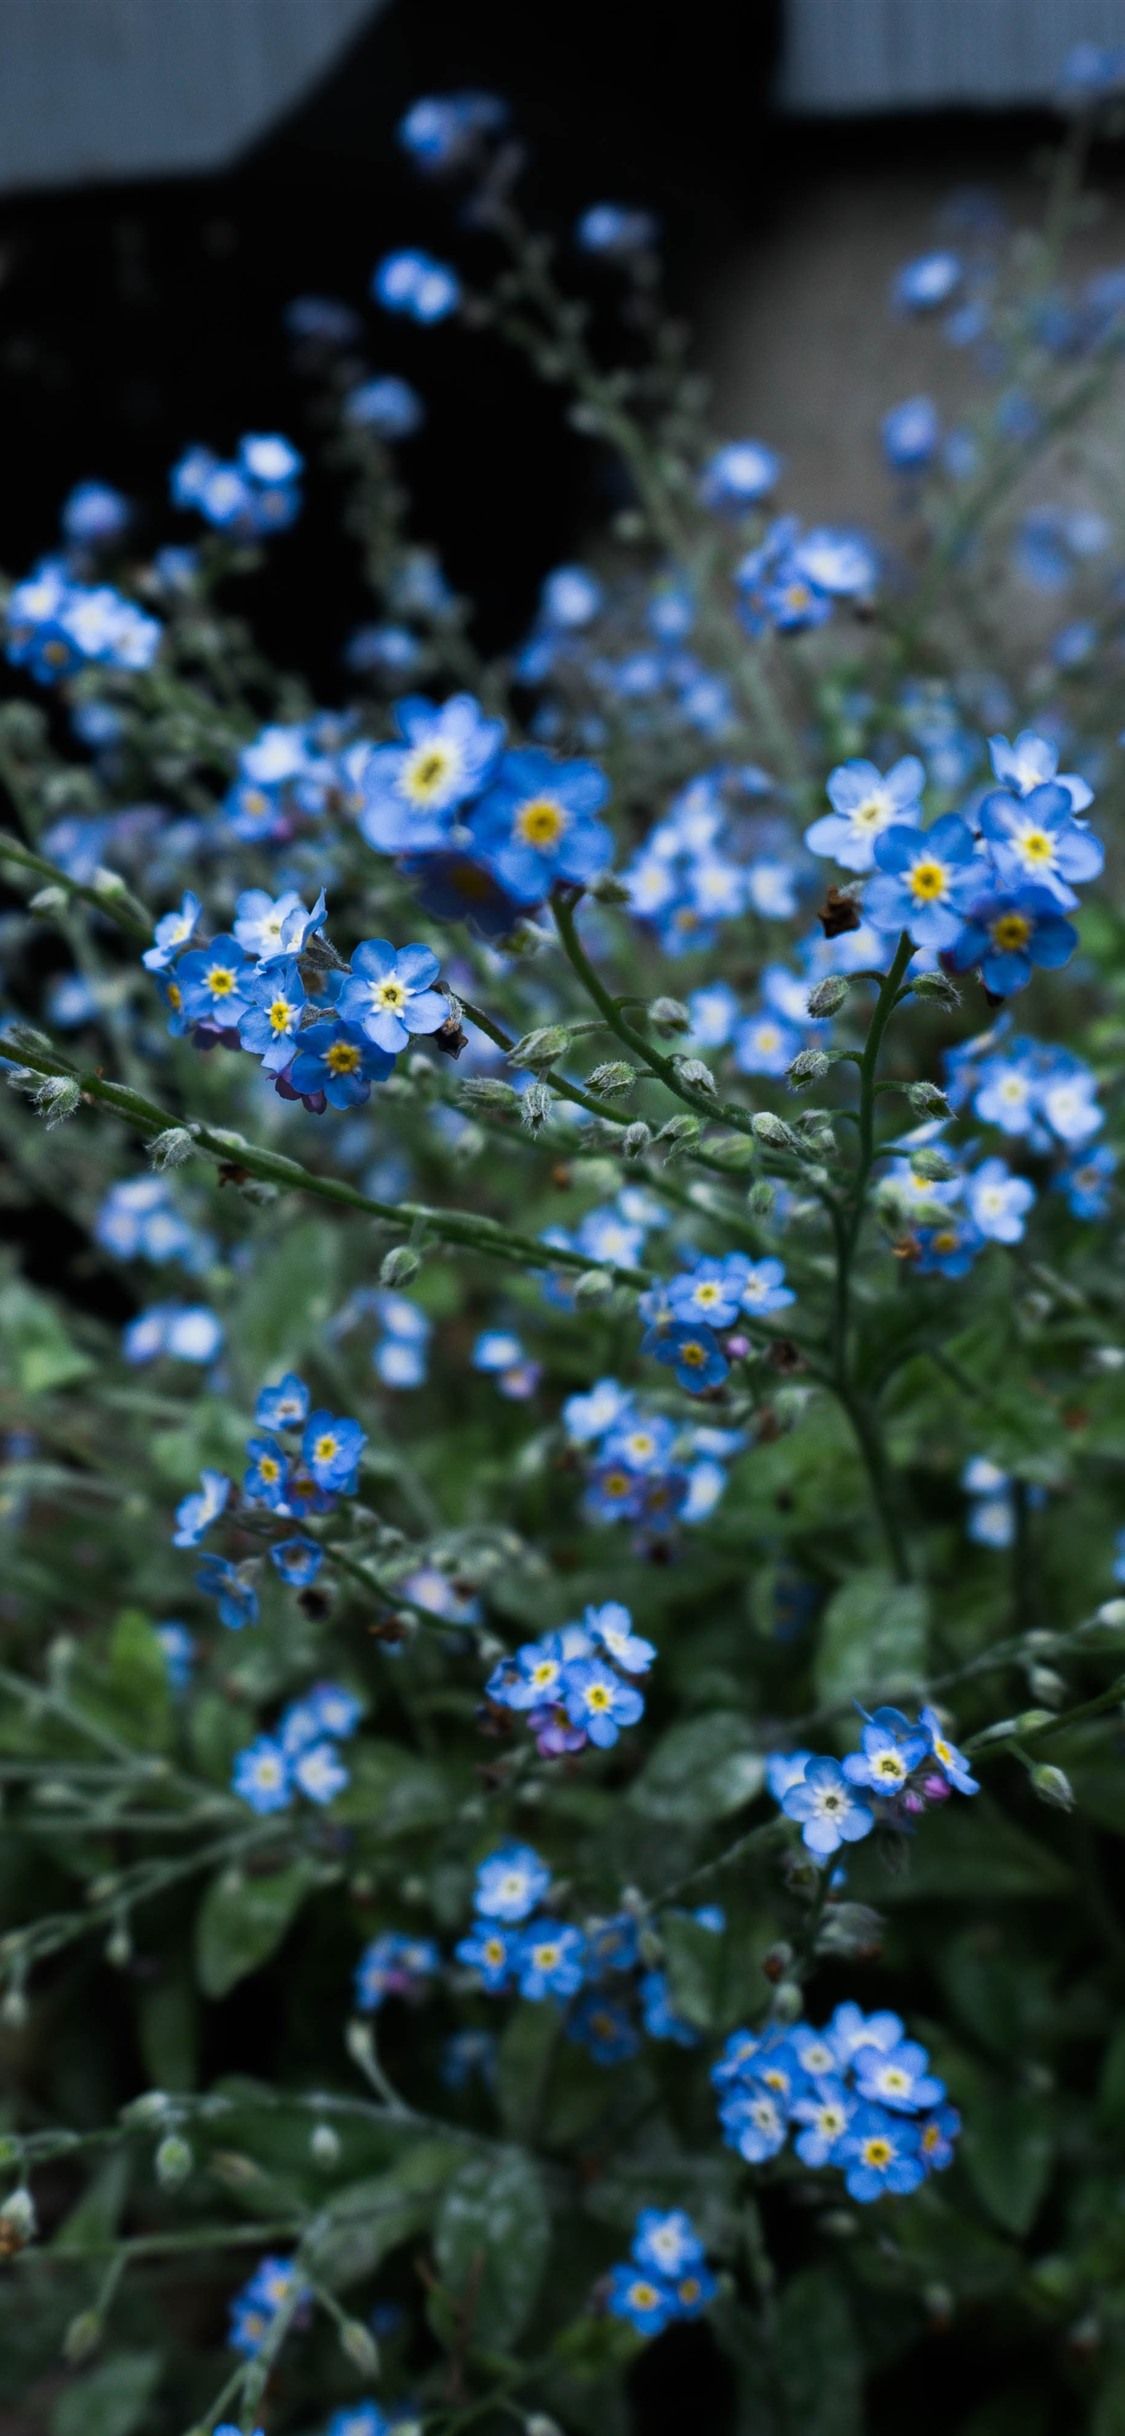 Forget Me Not, Blue Little Flowers 1242x2688 IPhone 11 Pro XS Max Wallpaper, Background, Picture, Image